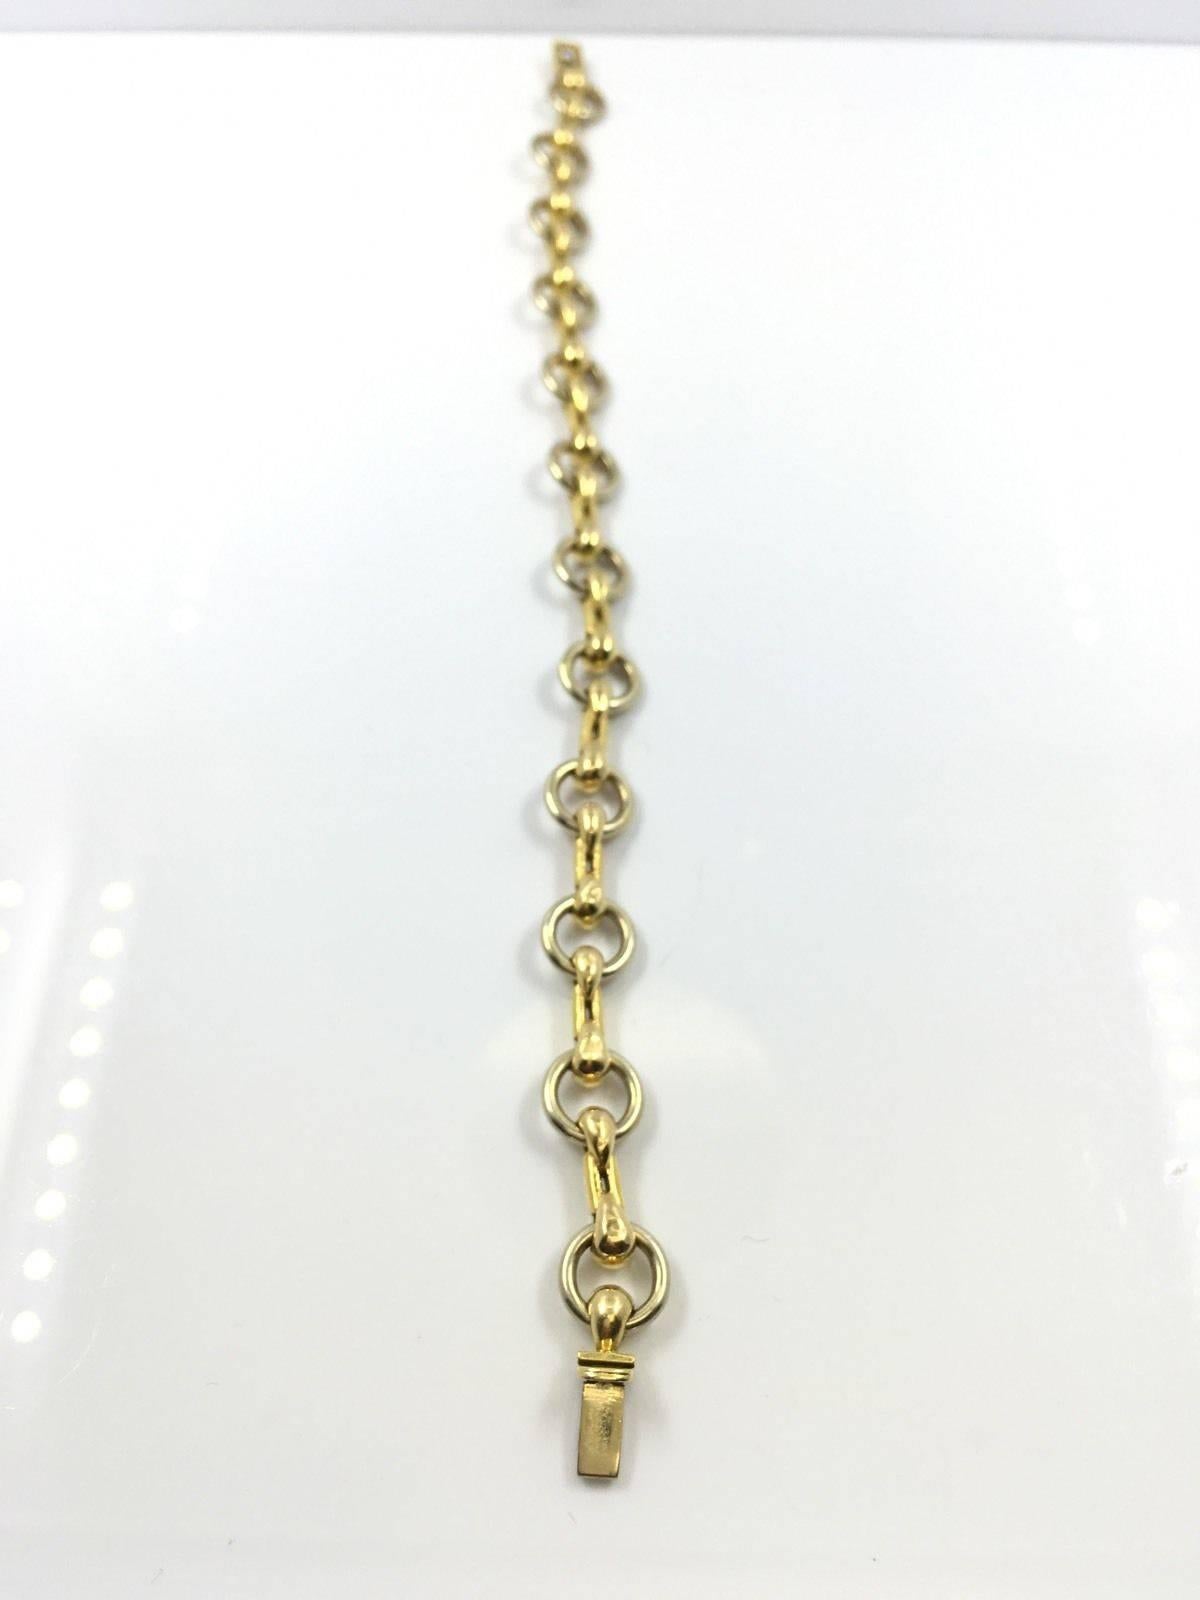 Cartier 18K Two Tone Gold Chain Link Designer Bracelet

This authentic Cartier bracelet is finely crafted from solid 18k yellow and white gold. It features a very attractive chain link design which looks absolutely fabulous on the wrist. It is